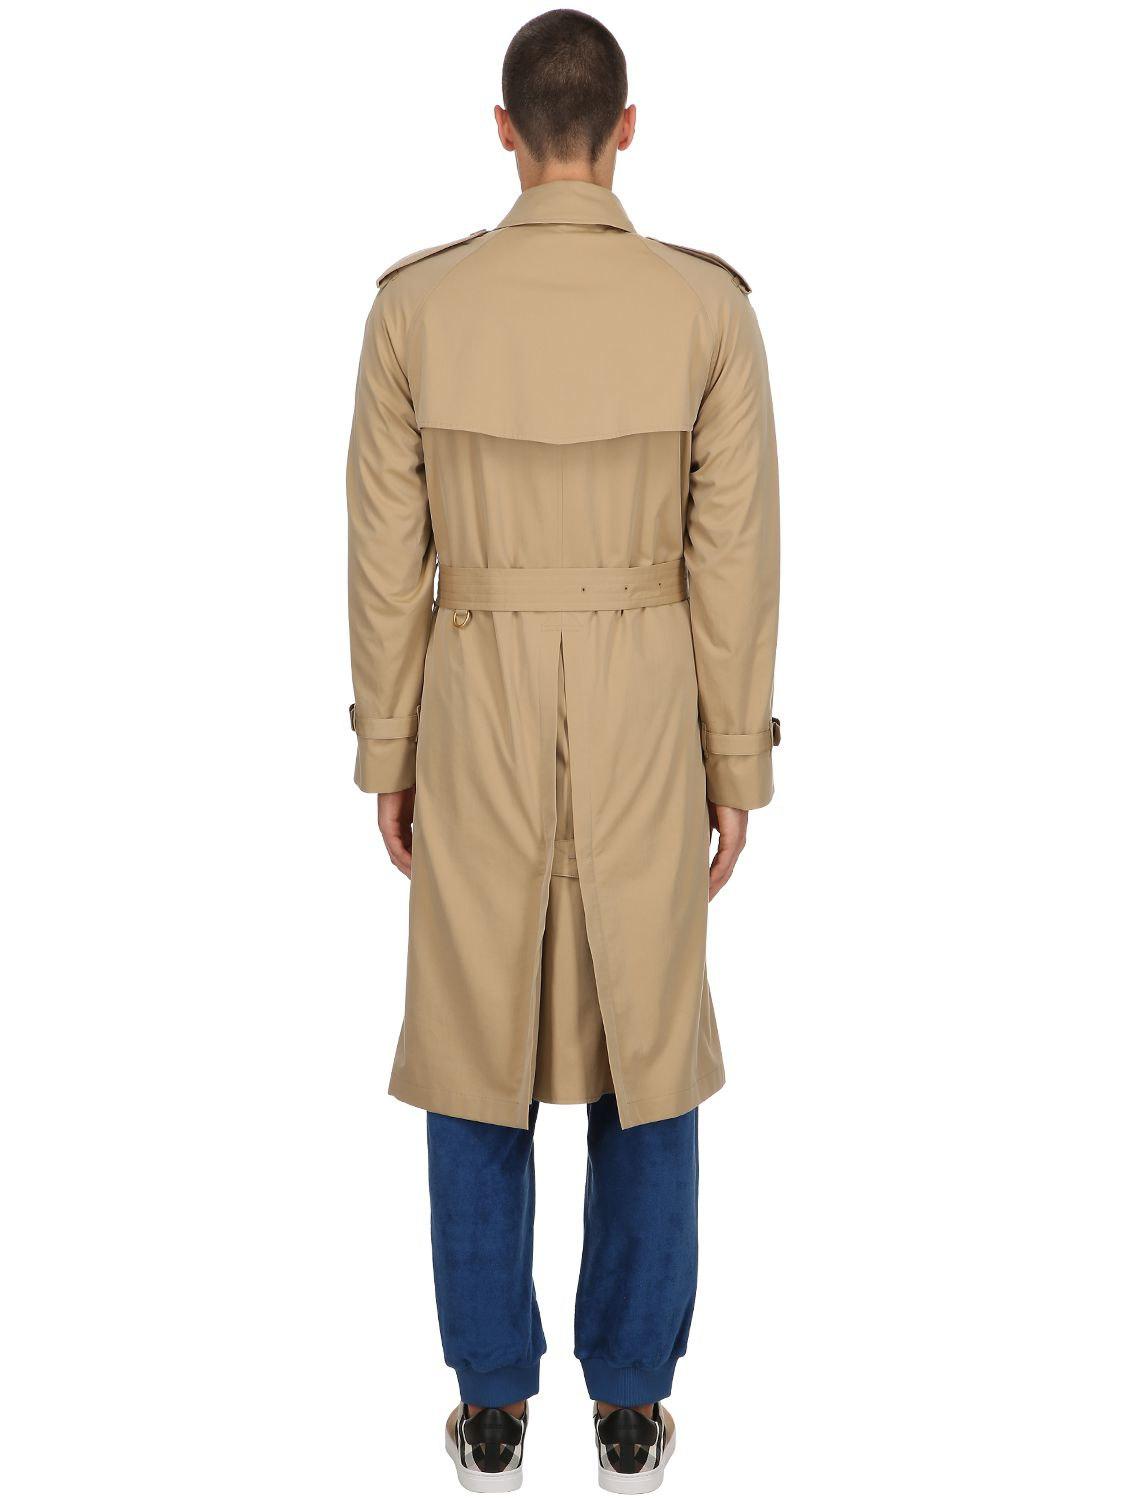 Due give Overlevelse Burberry Cotton Westminster Rainbow Check Trench Coat in Honey (Natural)  for Men - Lyst